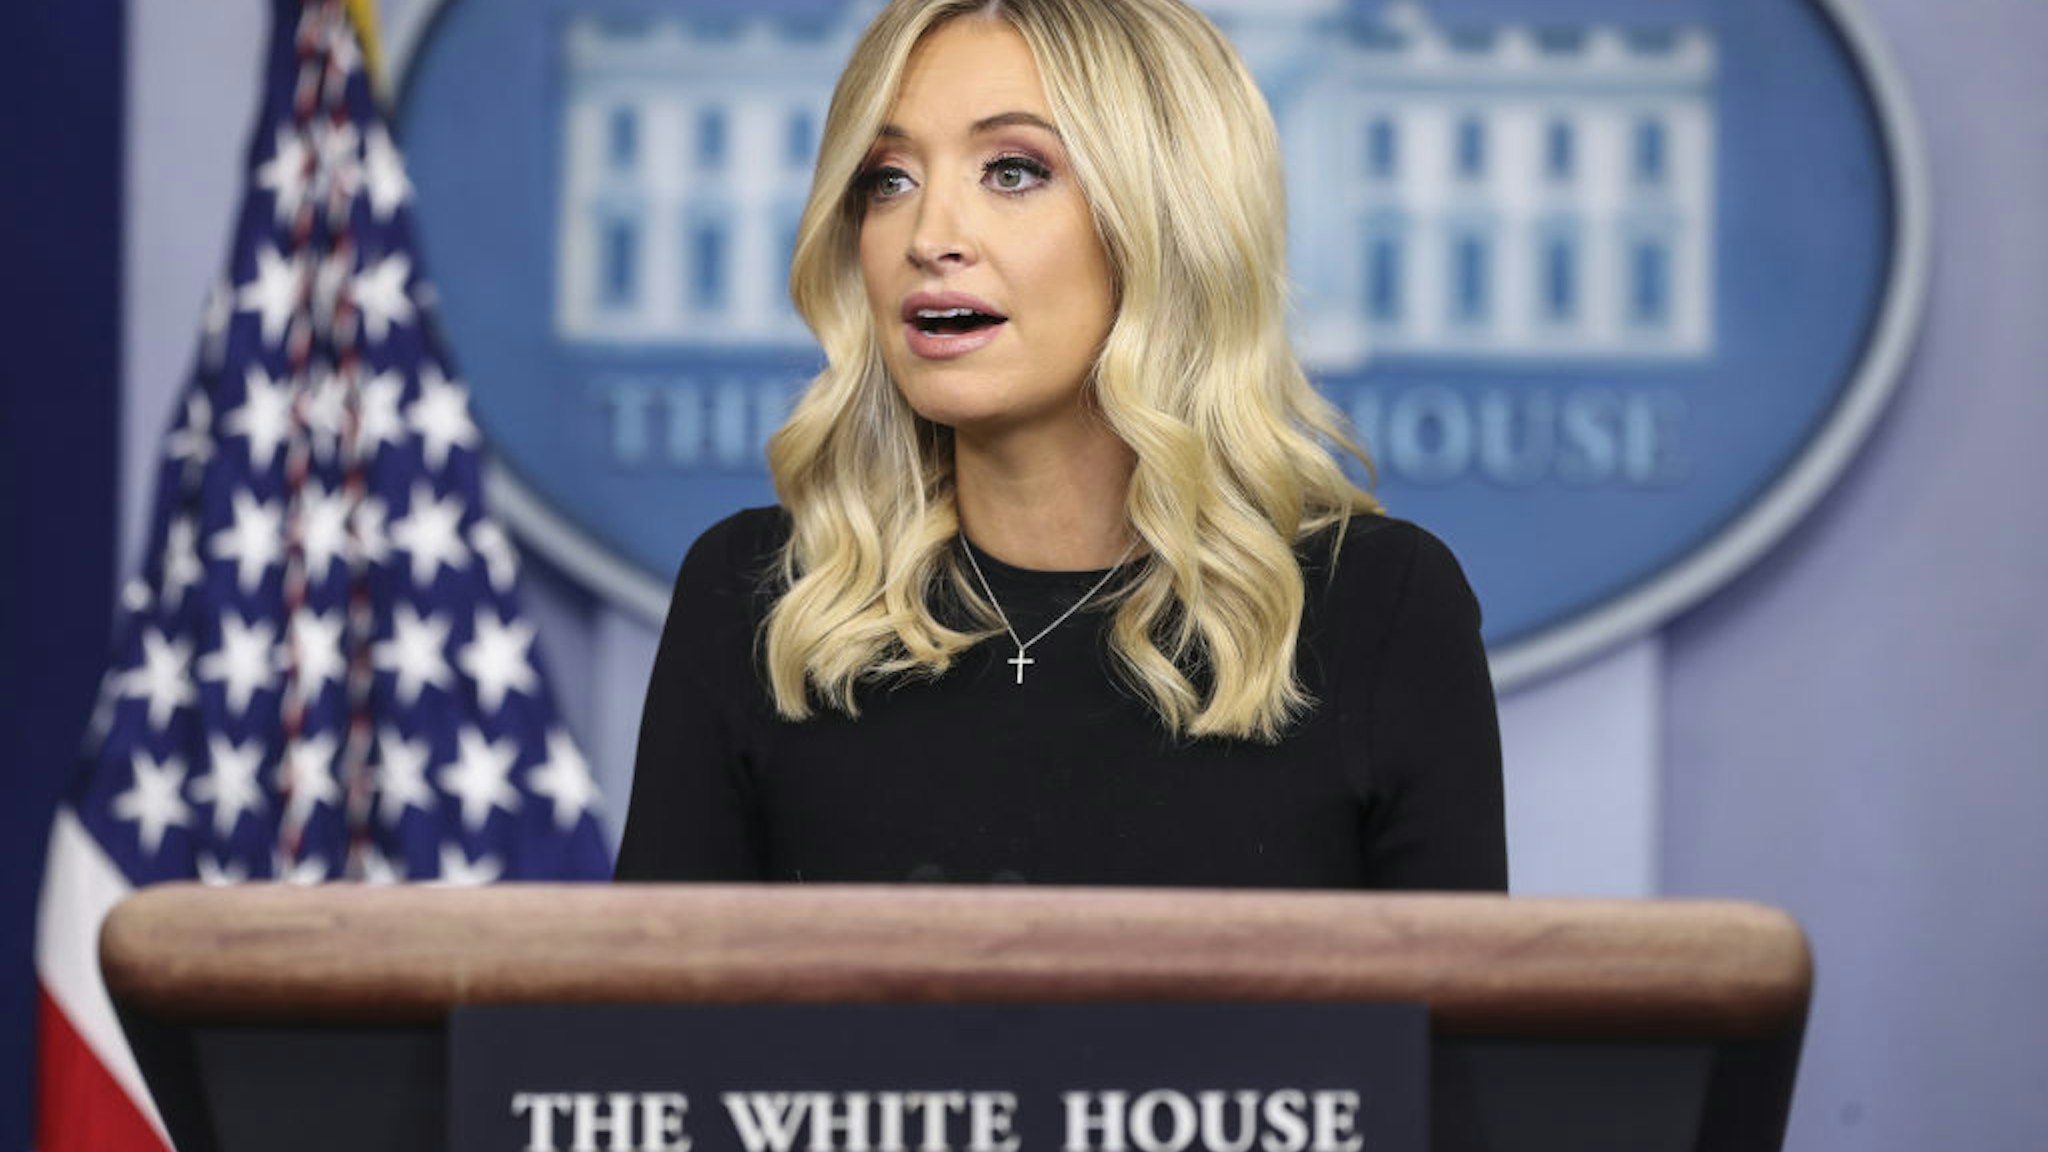 Kayleigh McEnany, White House press secretary, speaks during a briefing in Washington, D.C., U.S., on Tuesday, May 26, 2020. McEnany